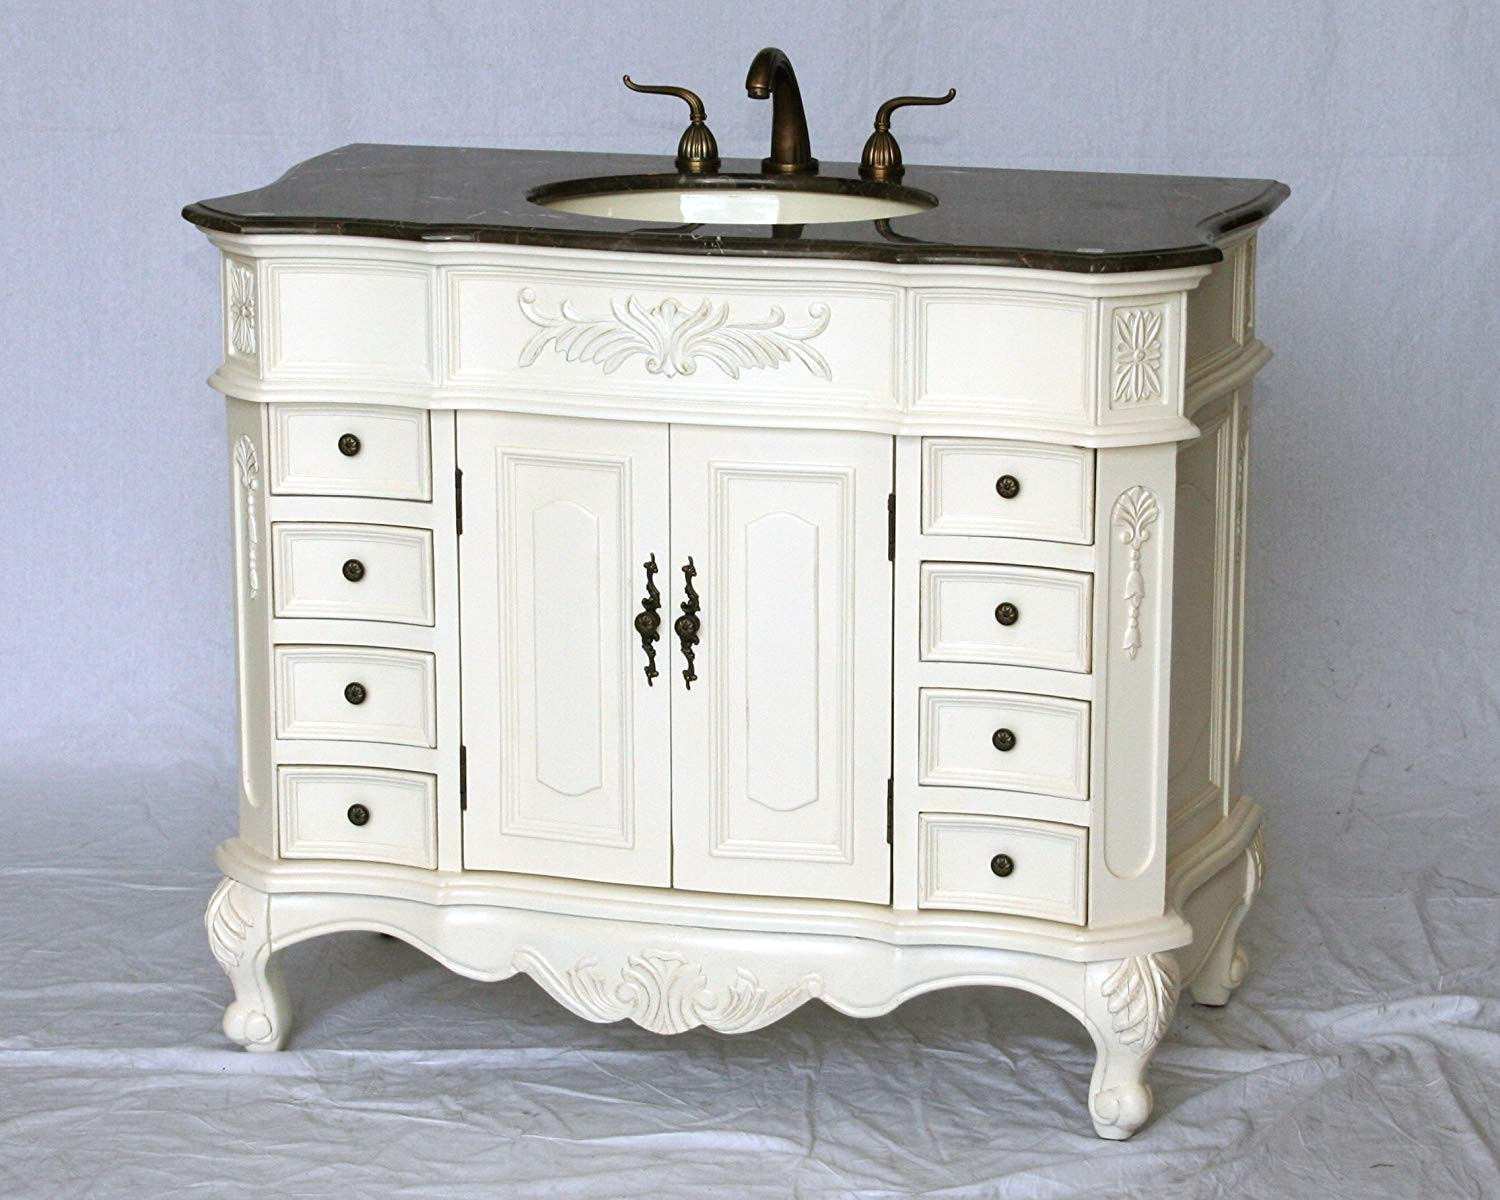 Best ideas about Amazon Bathroom Vanity
. Save or Pin 42 Inch Antique Style Single Sink Bathroom Vanity Model Now.